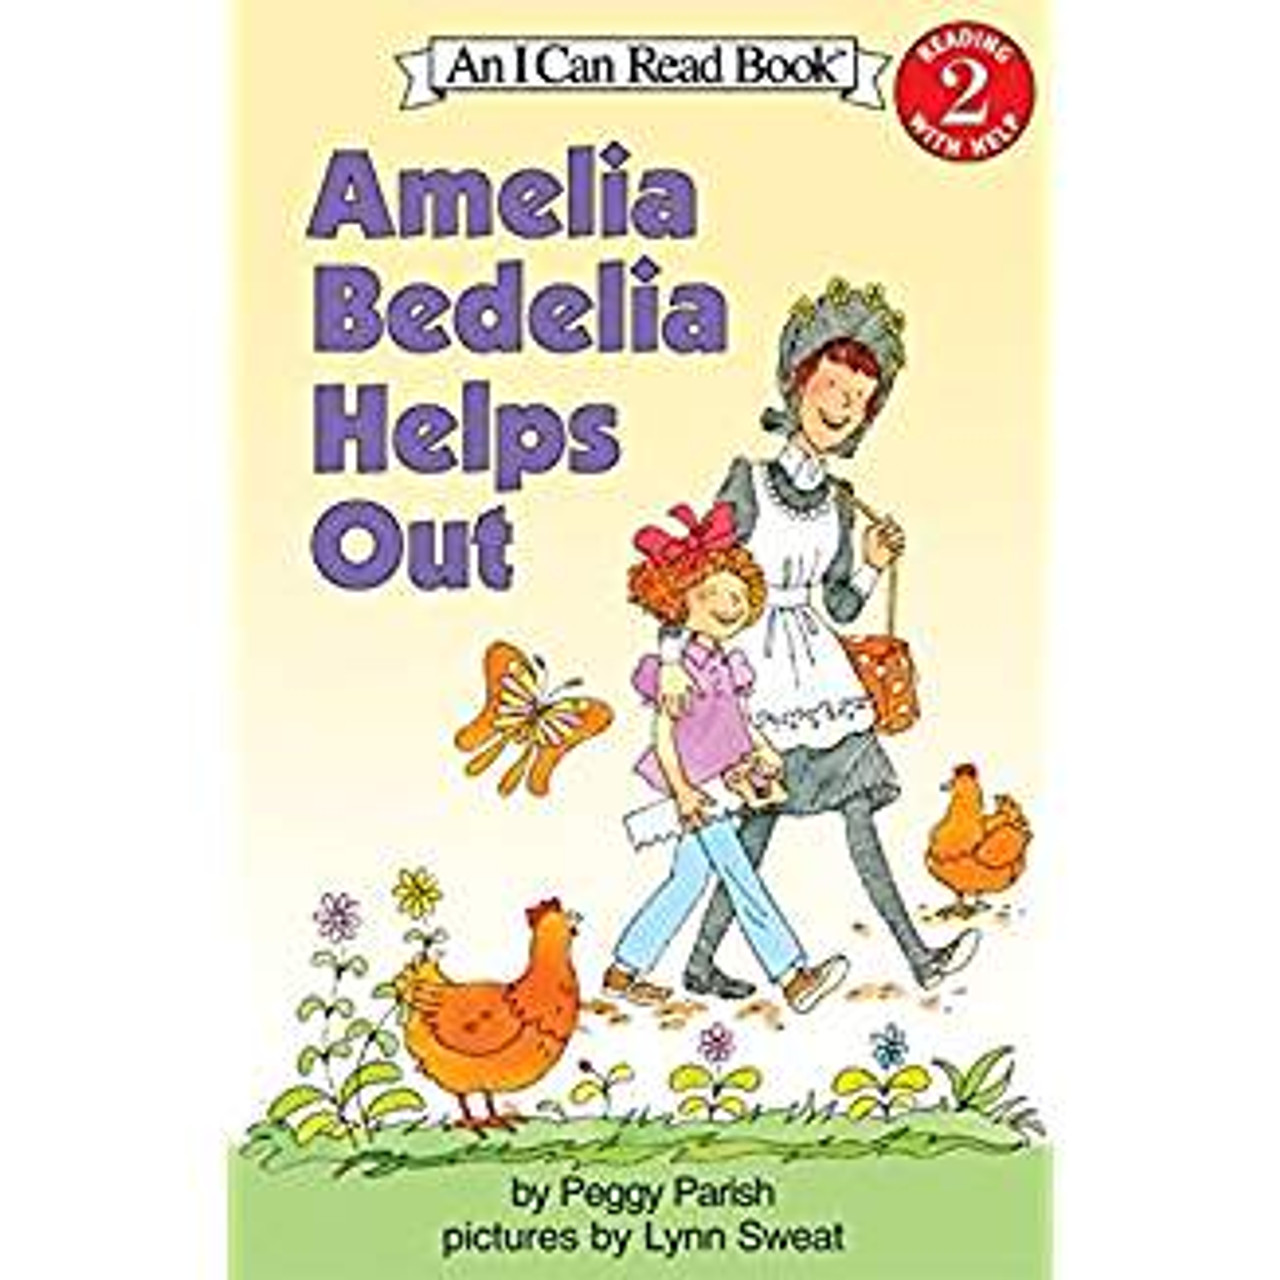 A neighbor needs Amelia Bedelia's helping hands, so everyone's favorite housekeeper is off to Miss Emma's house for a day of work. Now available for the first time in full color.